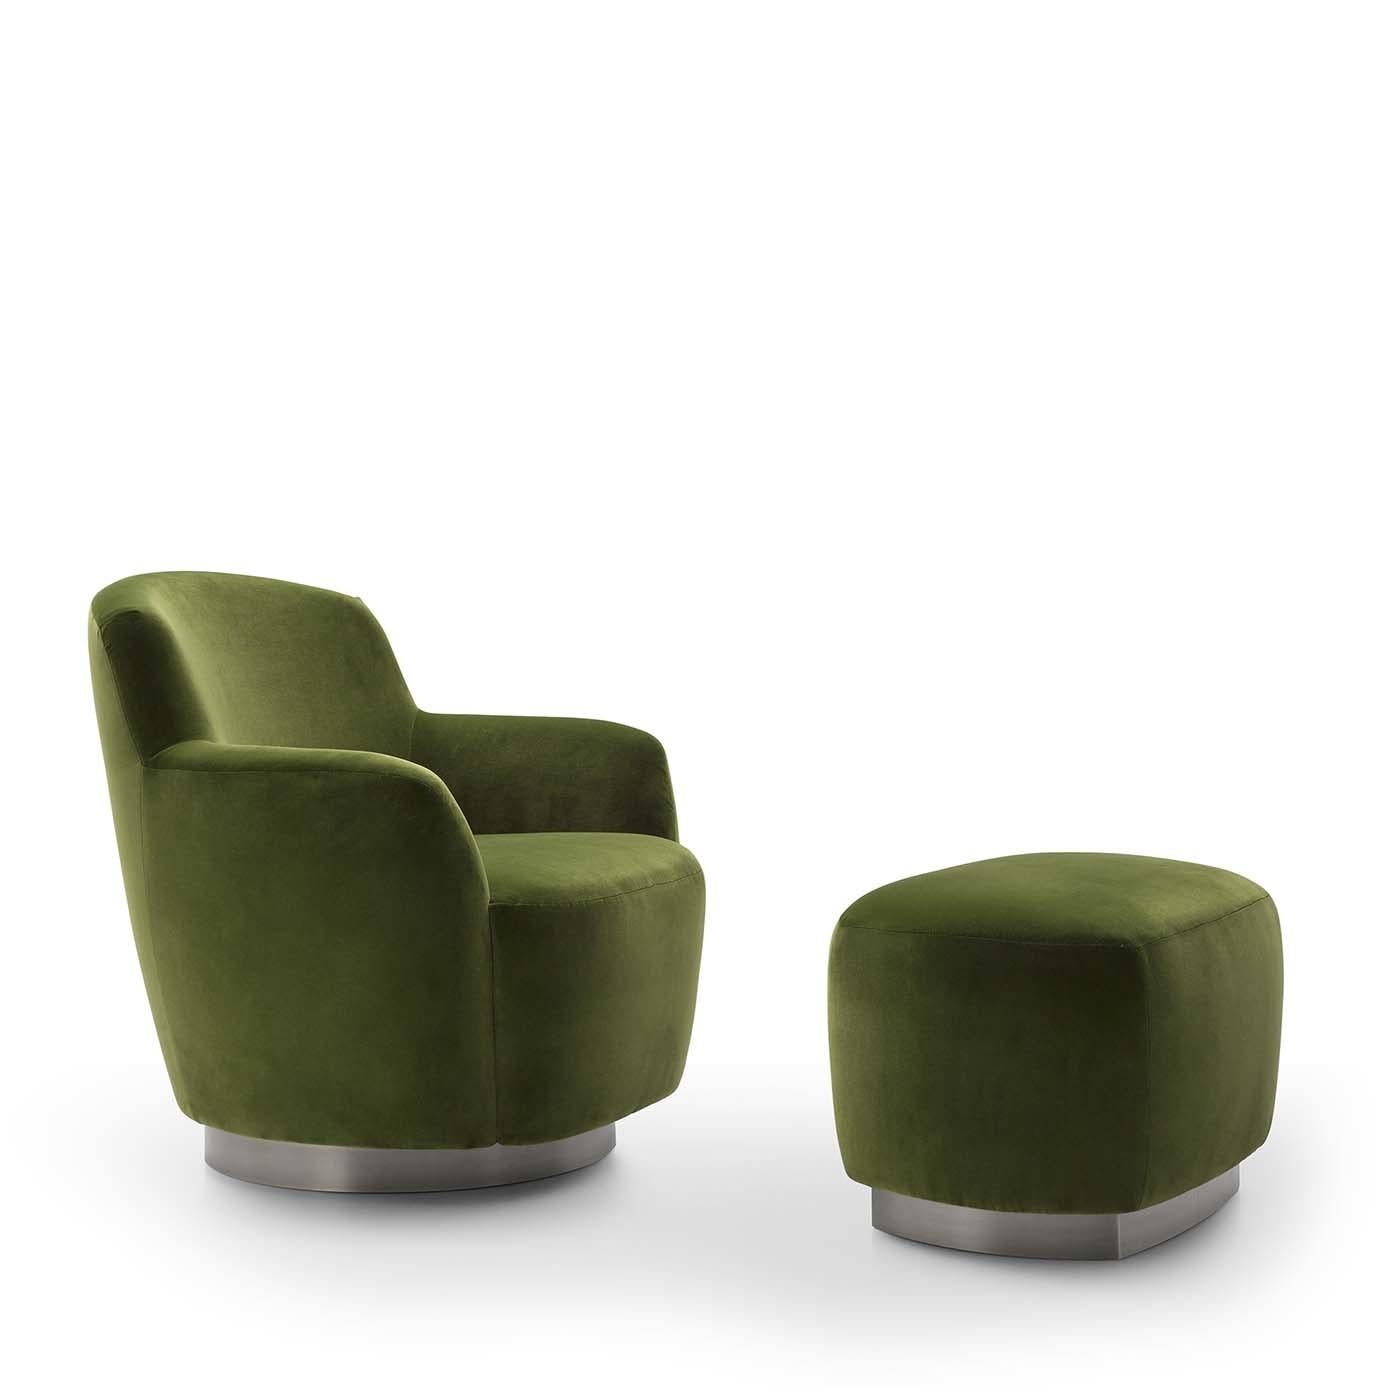 Design to complement the Ingrid armchair, this pouf follows the same full silhouette with a retro flavor. Covered in an elegant hunter-green velvet (Dama col. 19), this pouf stands on a base laminated with metal foil in glossy black chrome